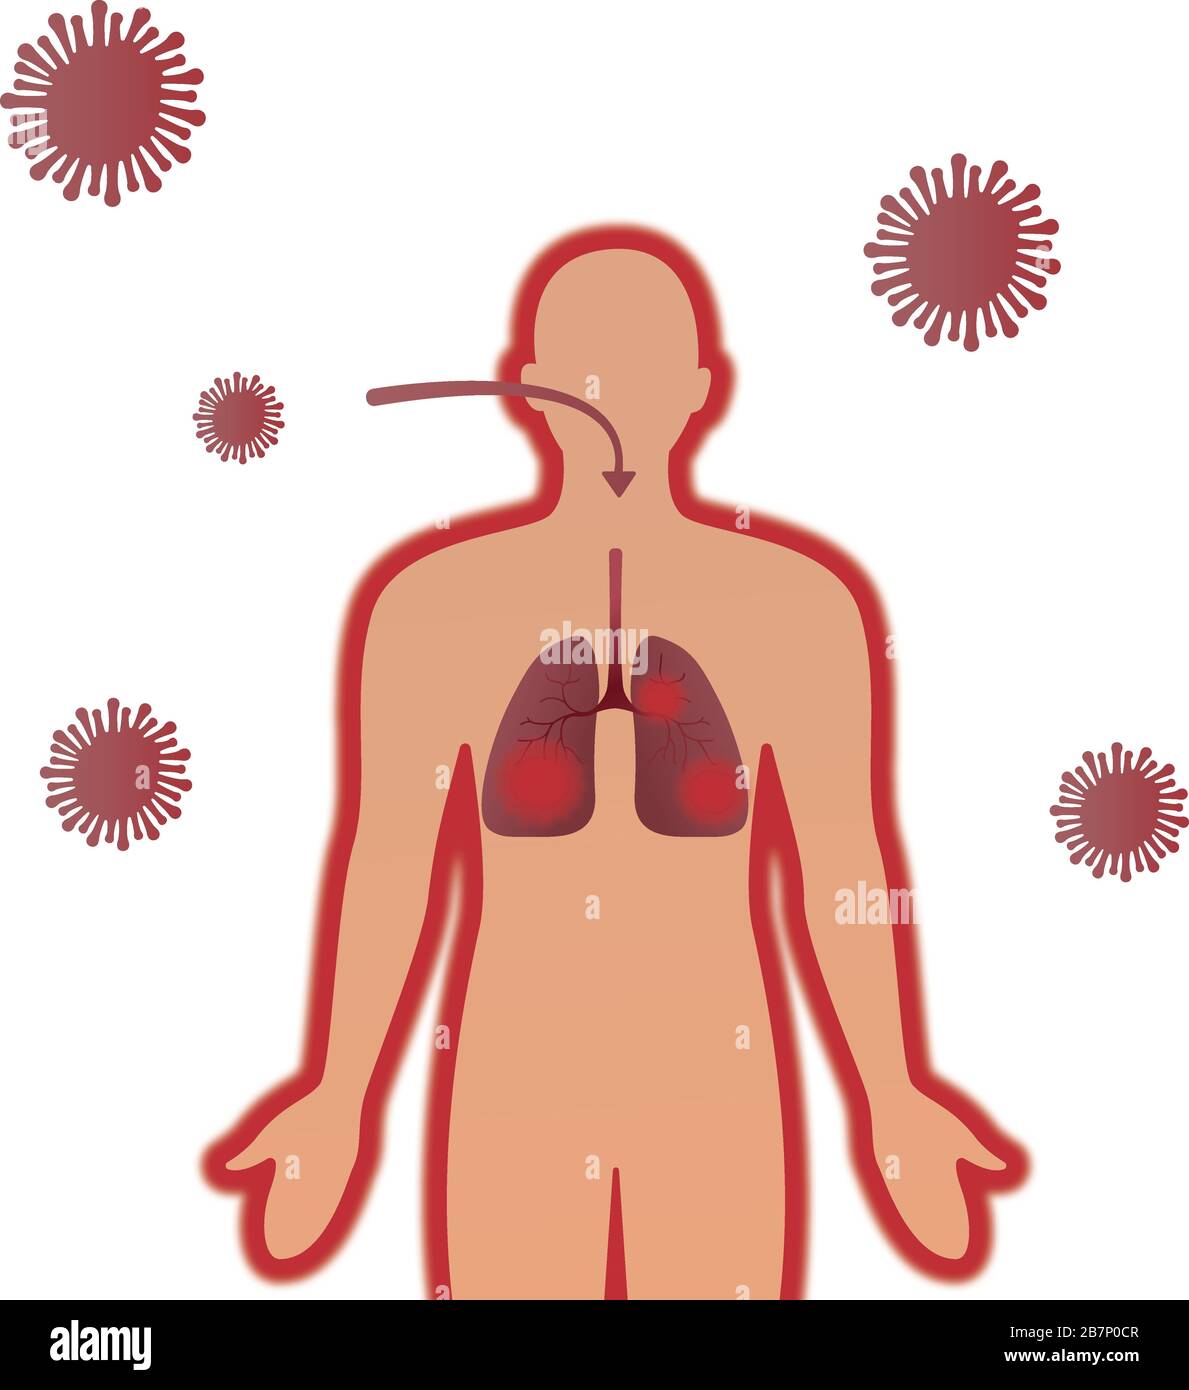 Wuhan coronavirus covit 19 related , human character, lungs infection or defected virus lungs and bacteria dangerous for health vectors illustration Stock Vector